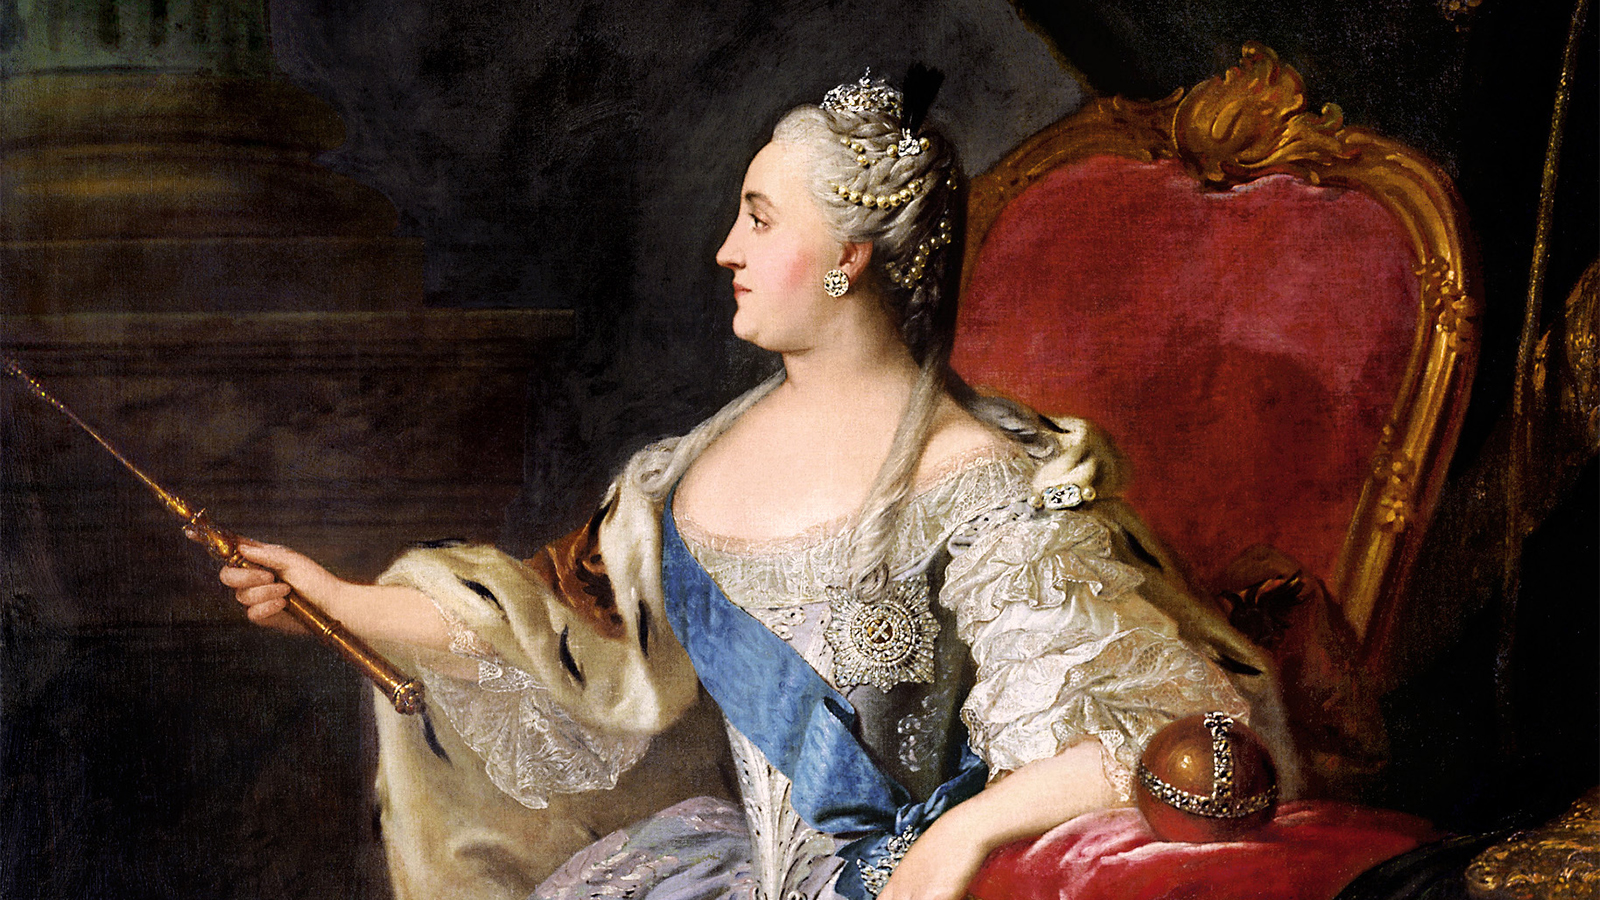 Catherine the Great, 1762-1796 | The Enlightenment